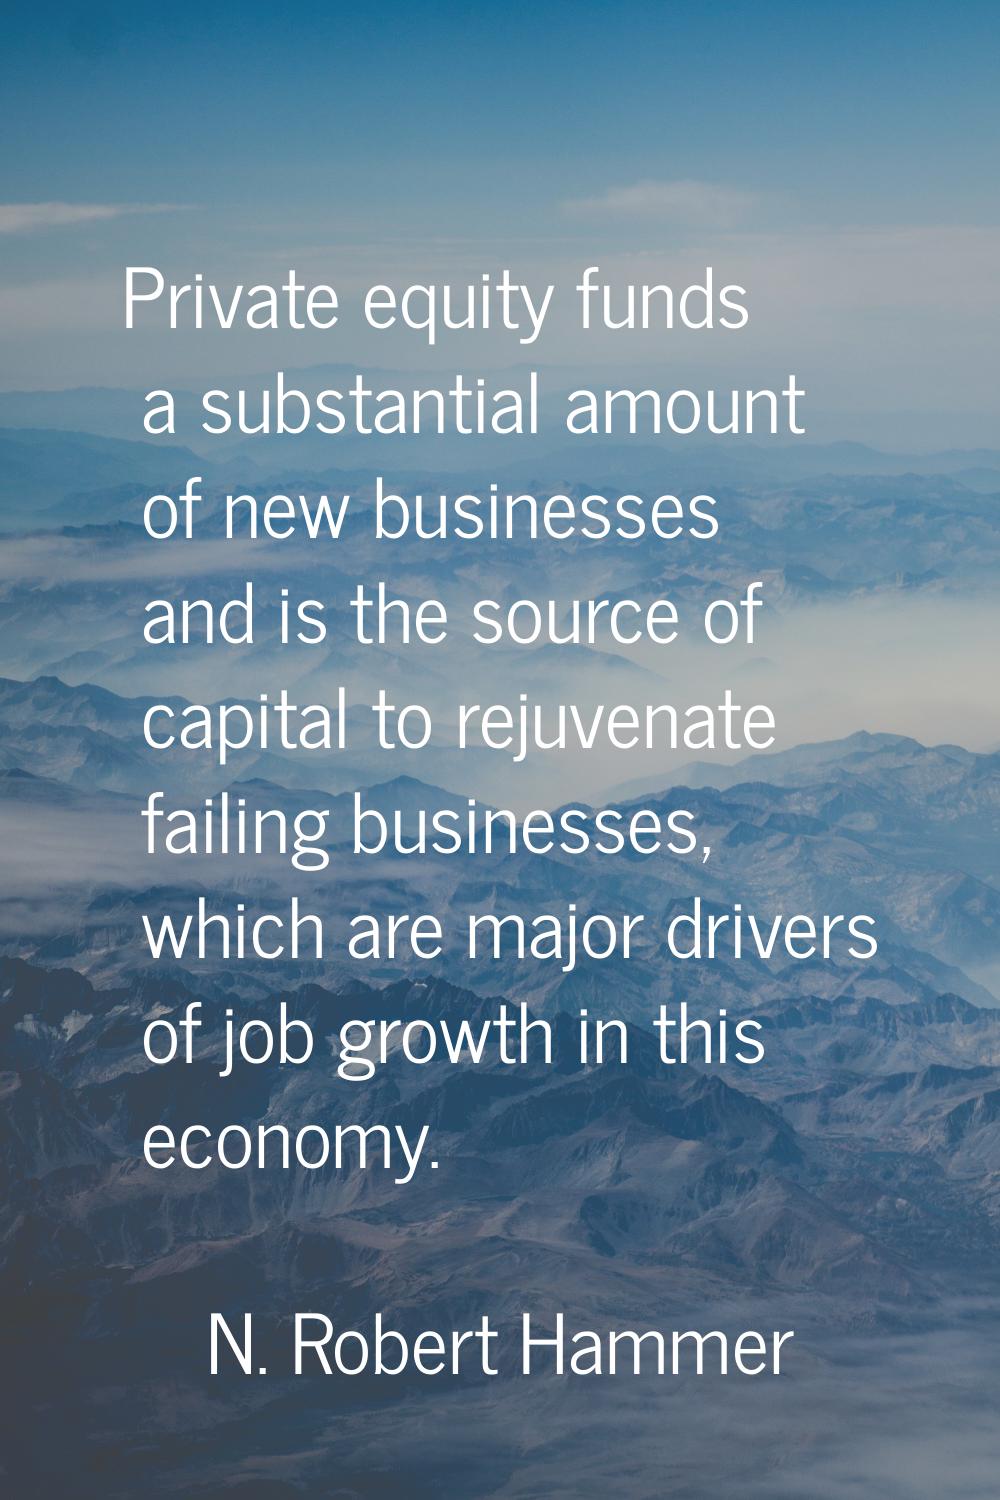 Private equity funds a substantial amount of new businesses and is the source of capital to rejuven